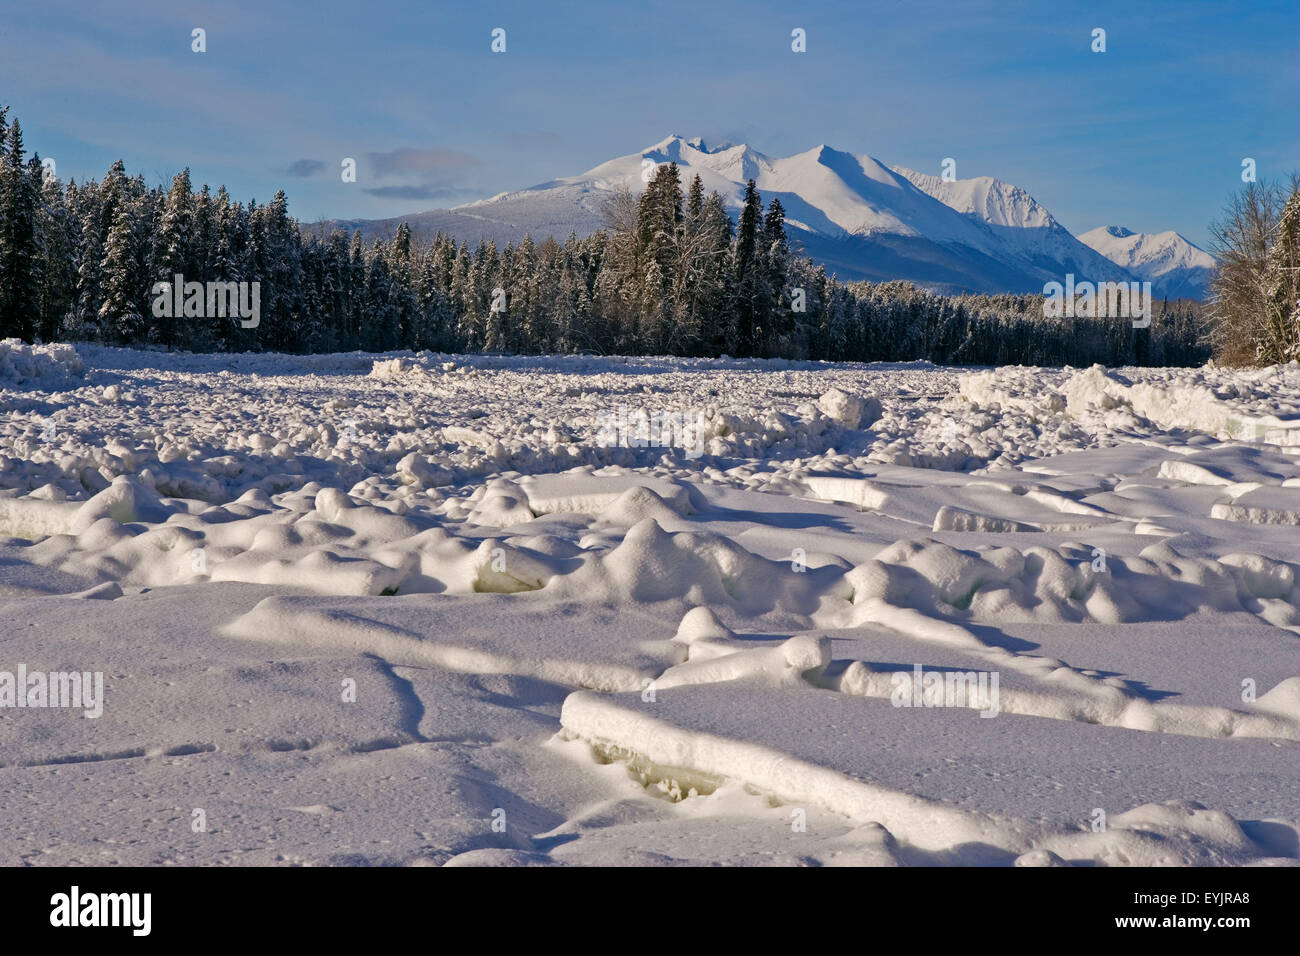 Beautiful View of Hudson Bay Mountain with frozen Bulkley River in foreground, British Columbia,Canada Stock Photo